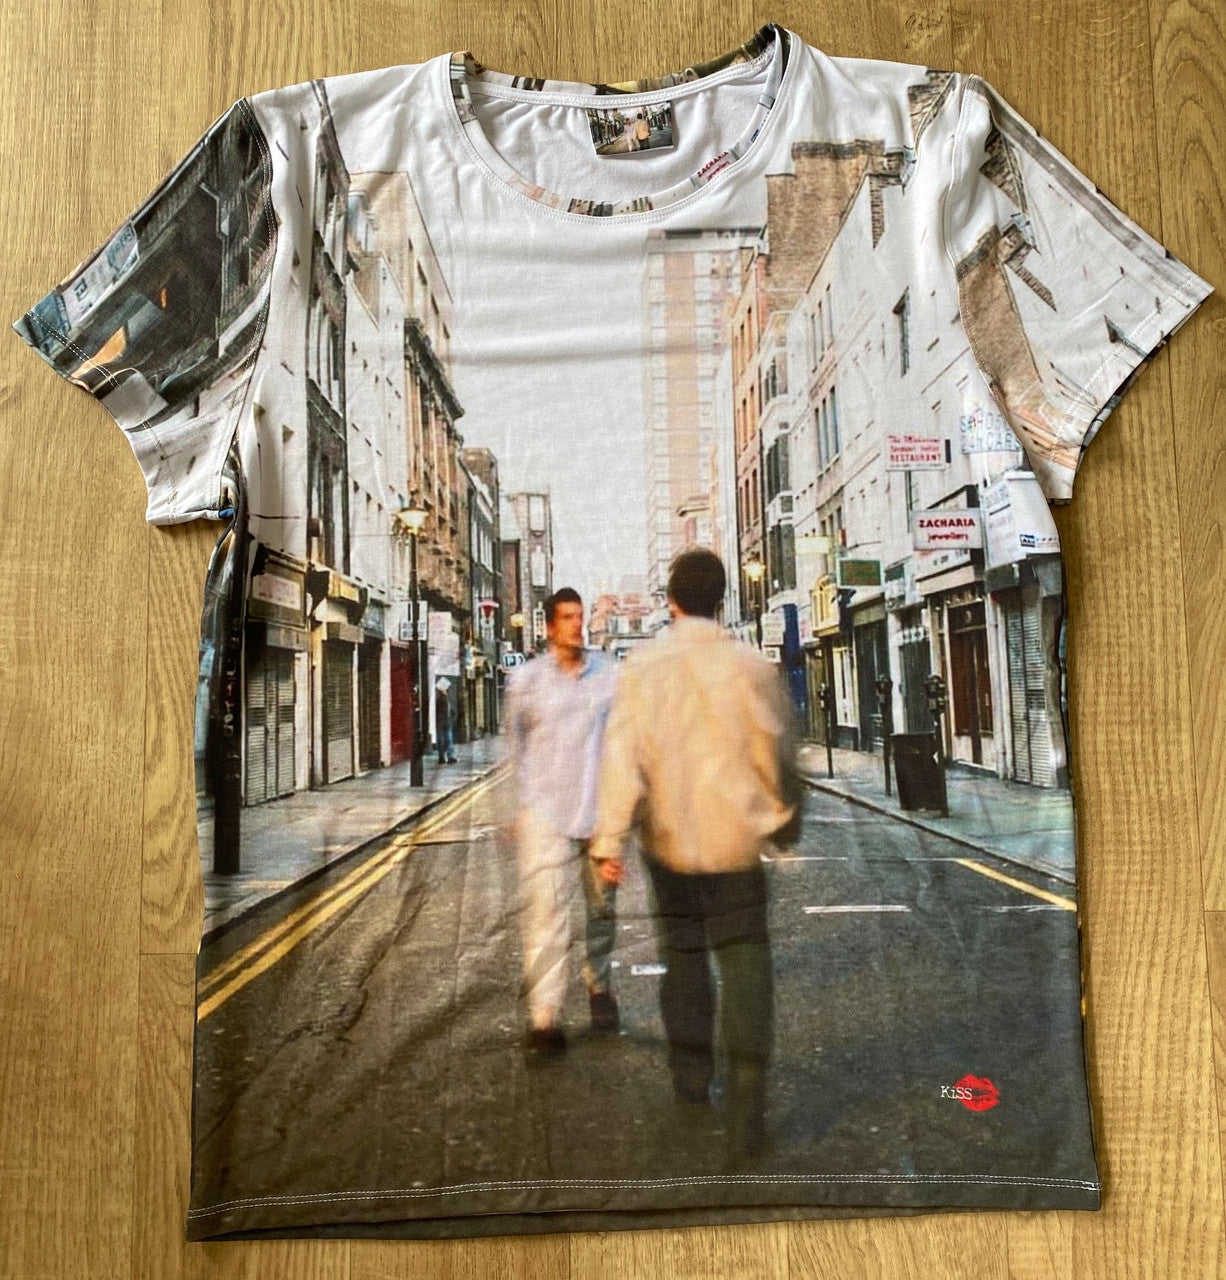 Oasis Morning Glory KiSS All Over T-Shirt - Gallagher brothers - Noel and Liam - What's the Story? Gift Idea - indie fan